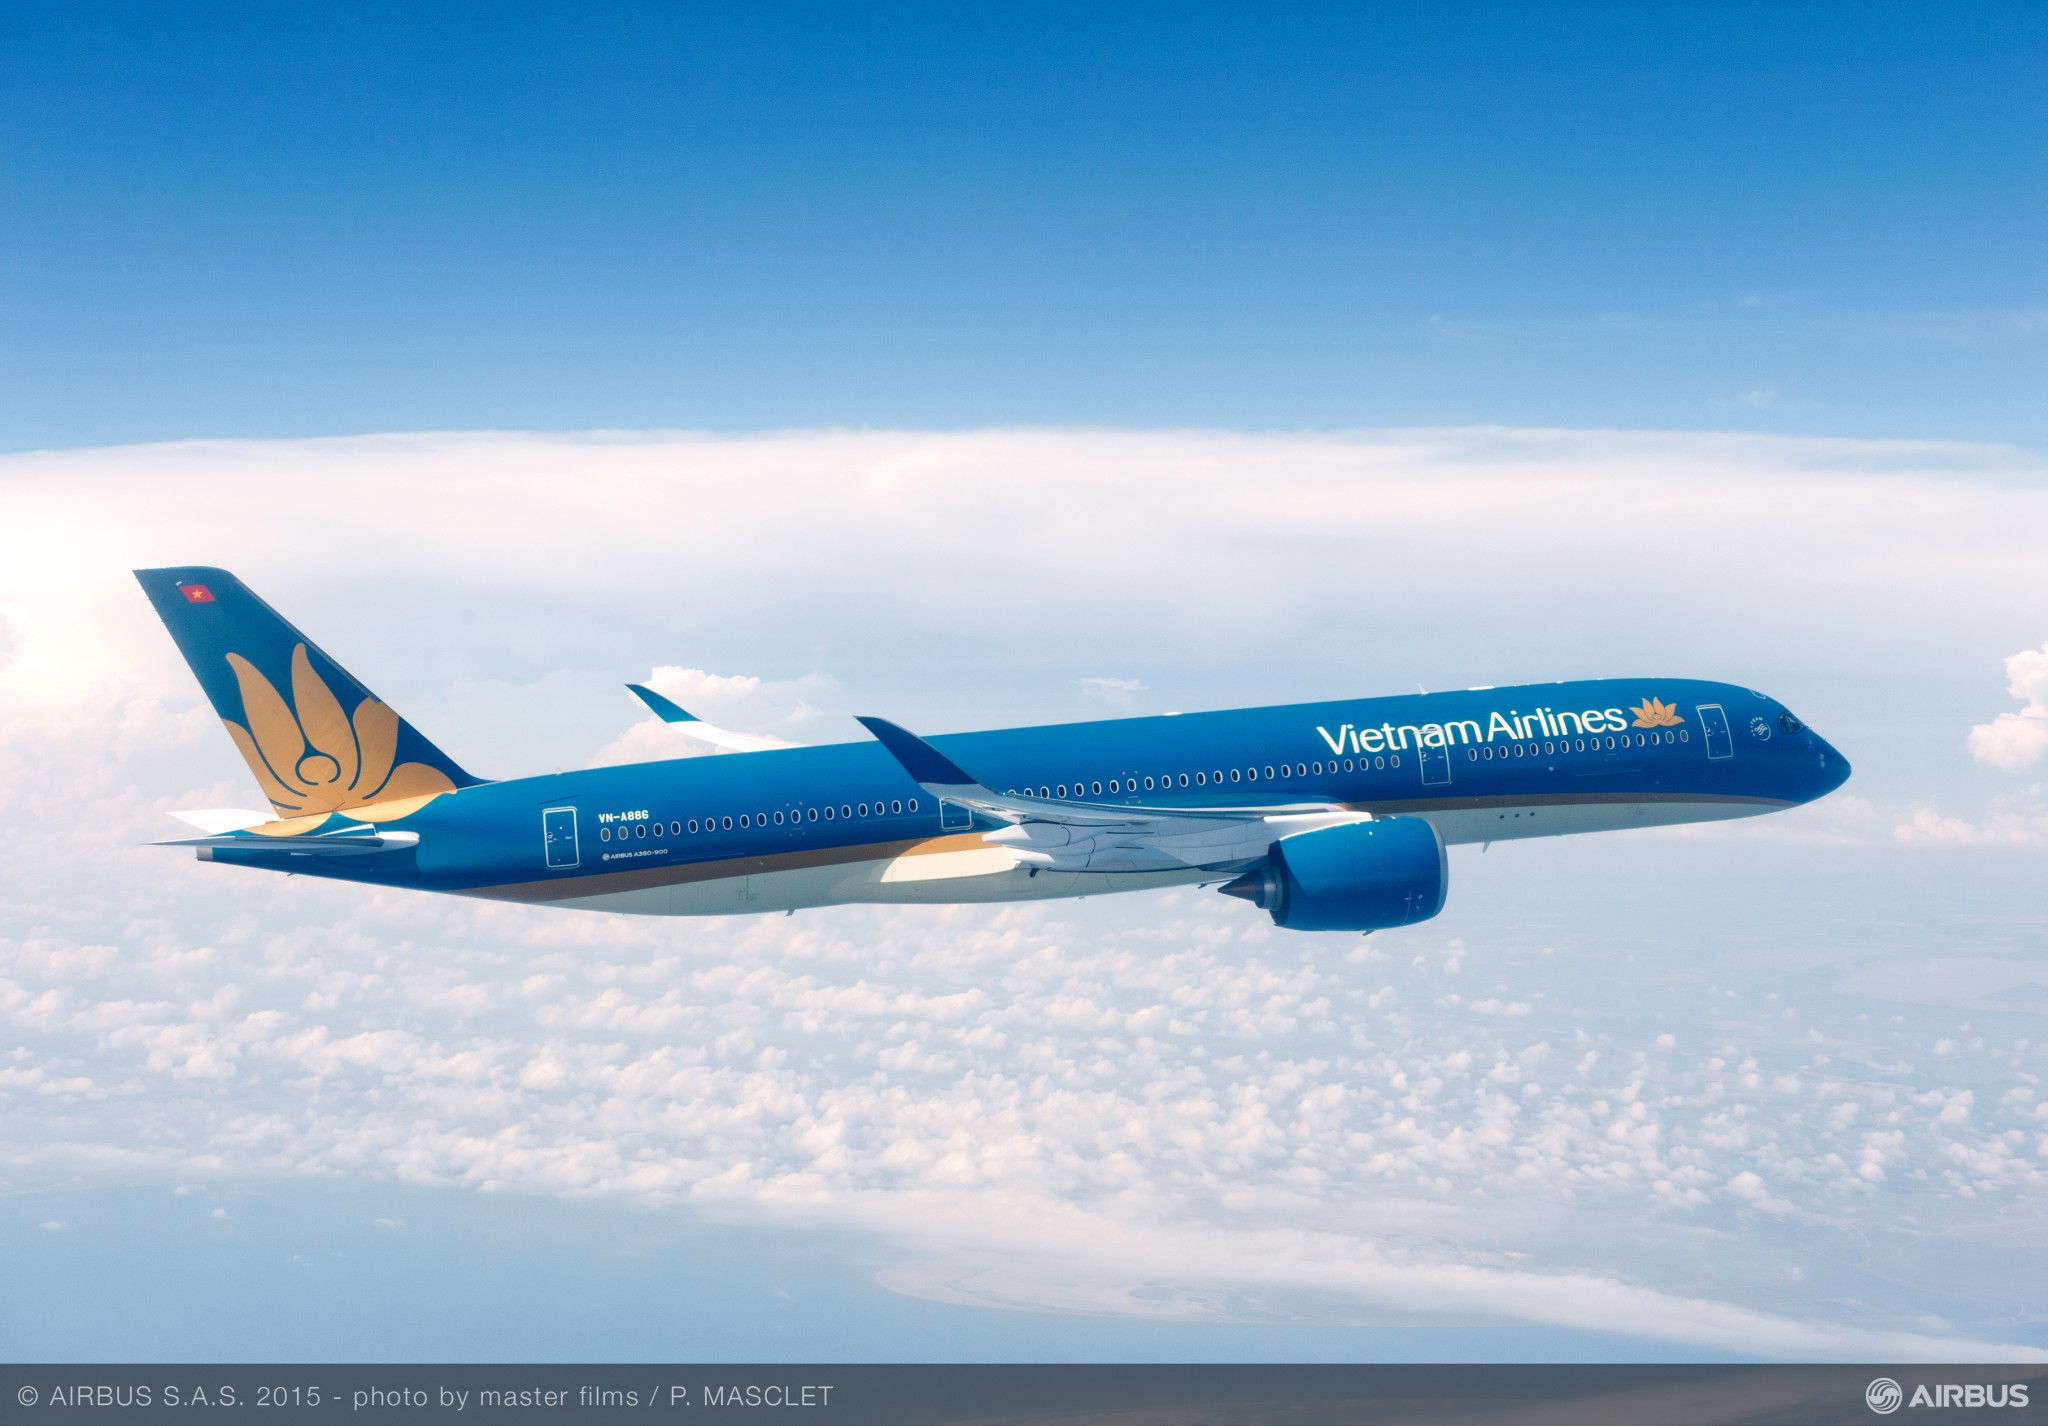 Vietnam Airlines reports a loss of $430 million in 2022